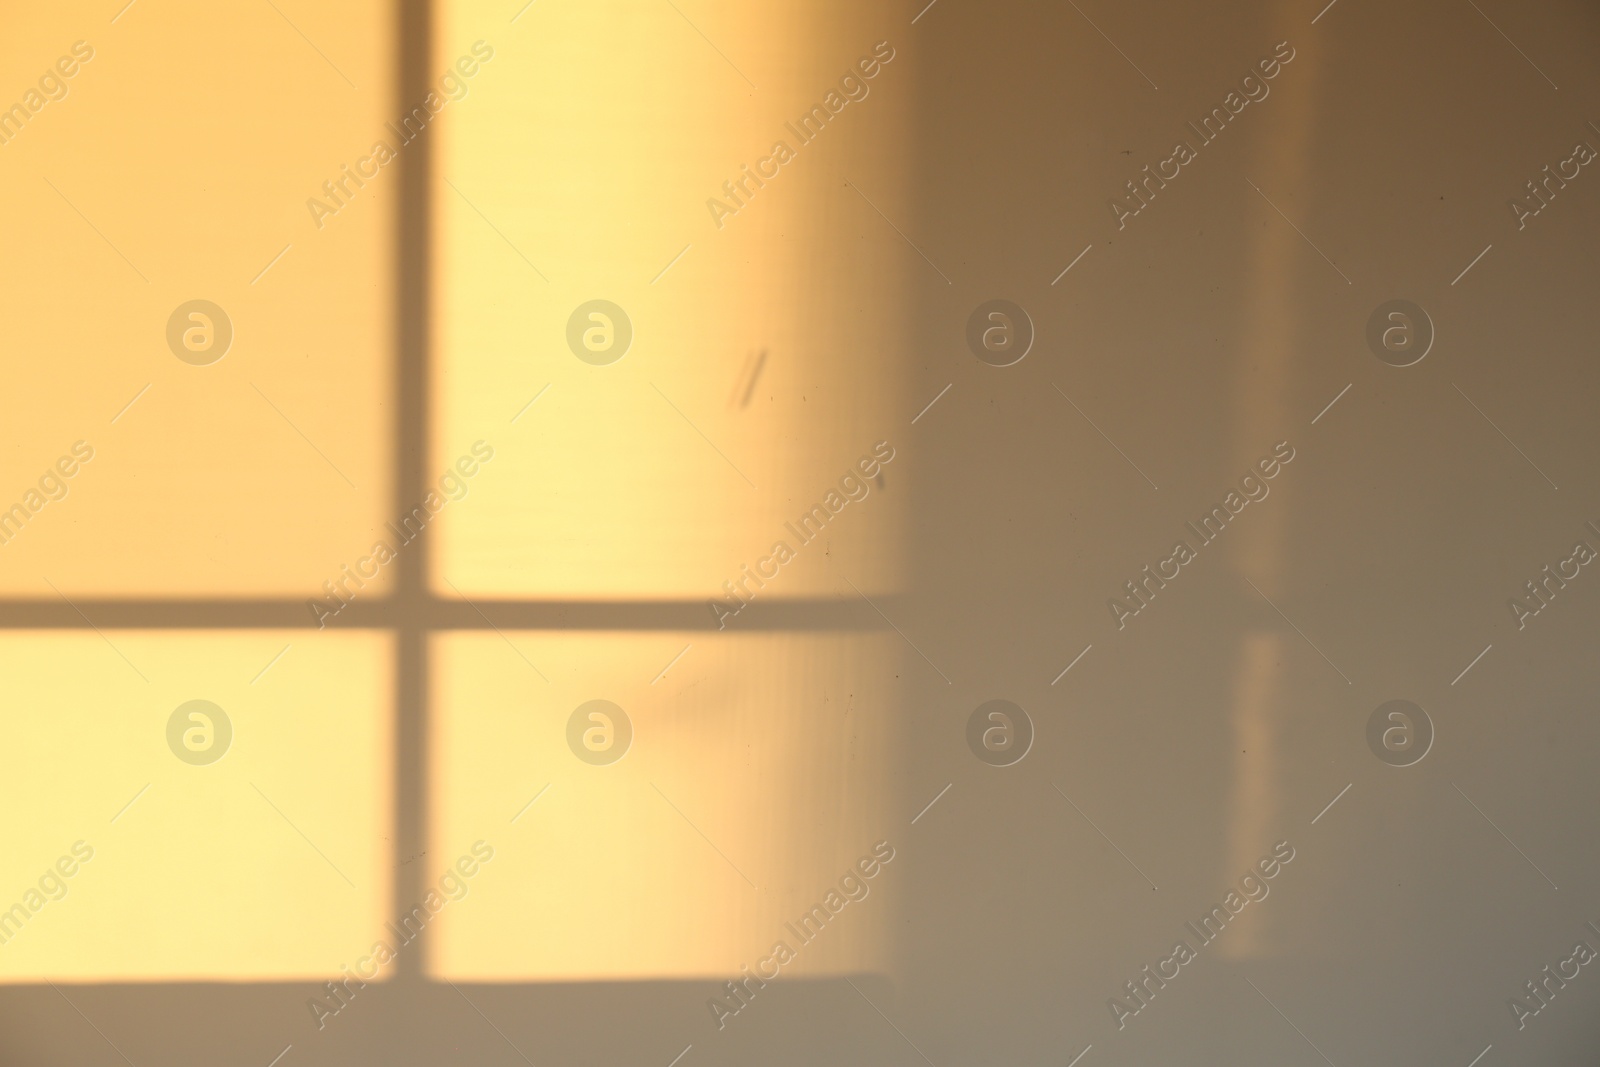 Photo of Light and shadow from window on wall